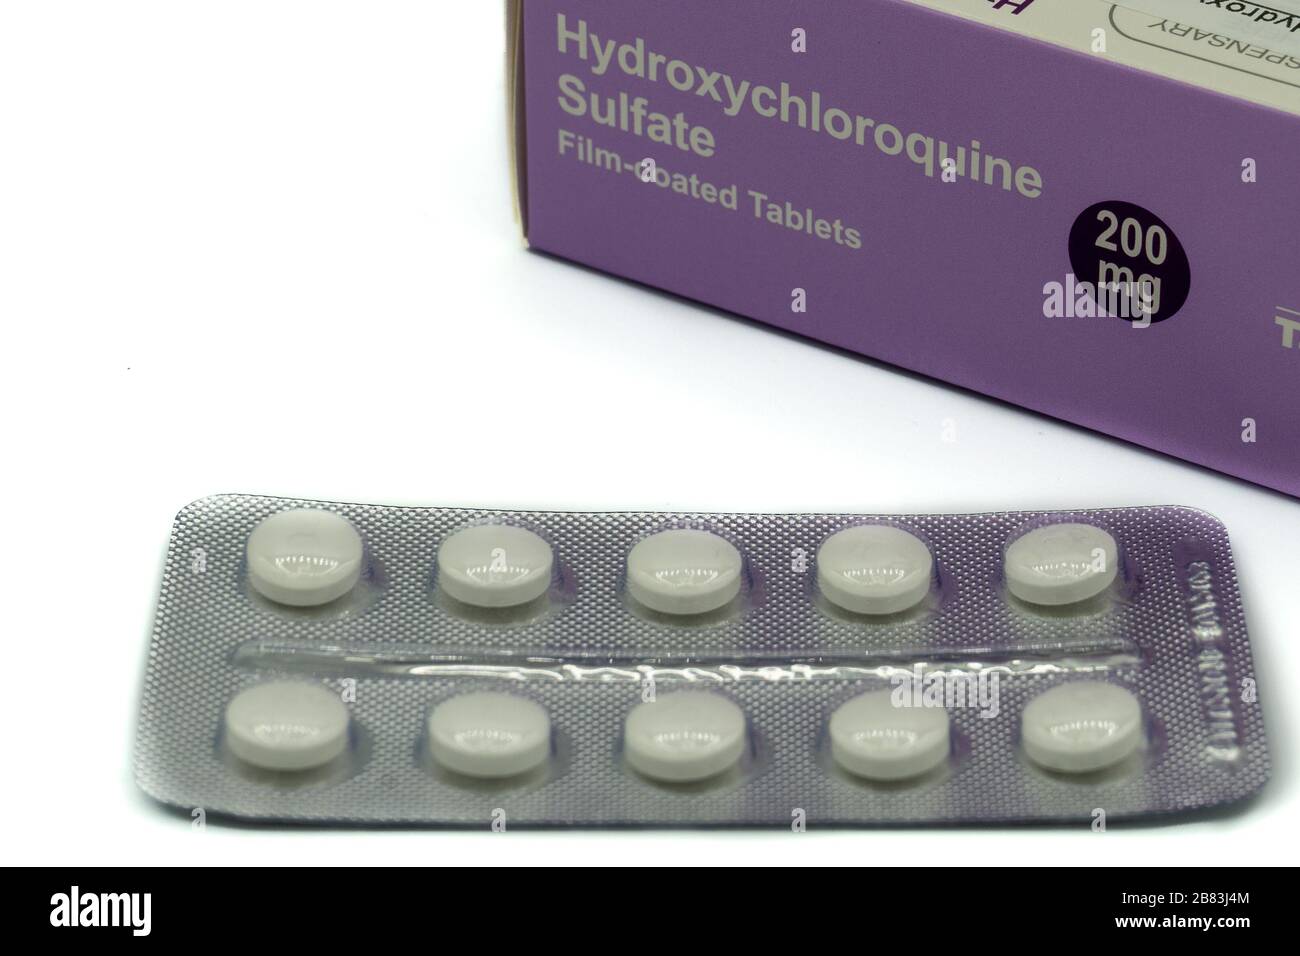 A box of Hydroxychloroquine tablets with the tablets in a packet in front also known as chloroquine or plaquenil Stock Photo